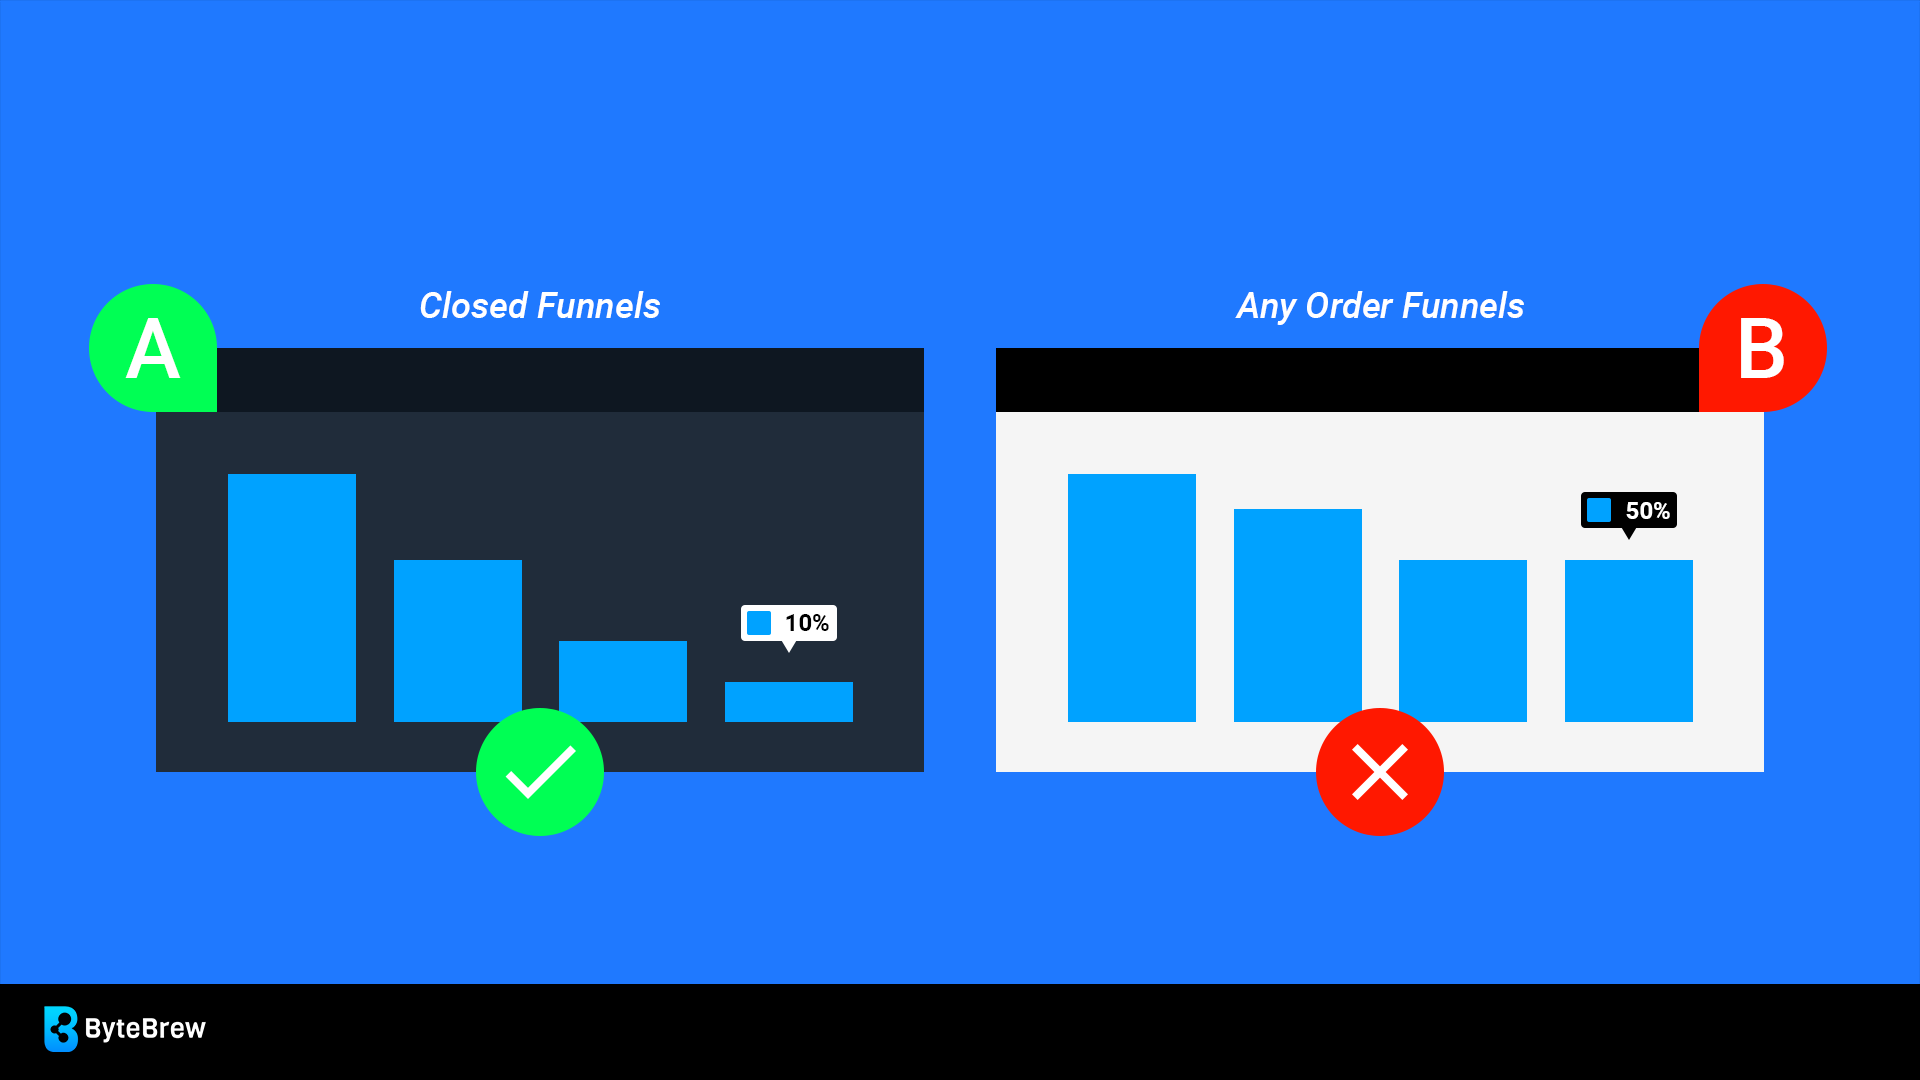 Any Order Funnels vs. Closed Funnels, explained by mobile analytics platform ByteBrew